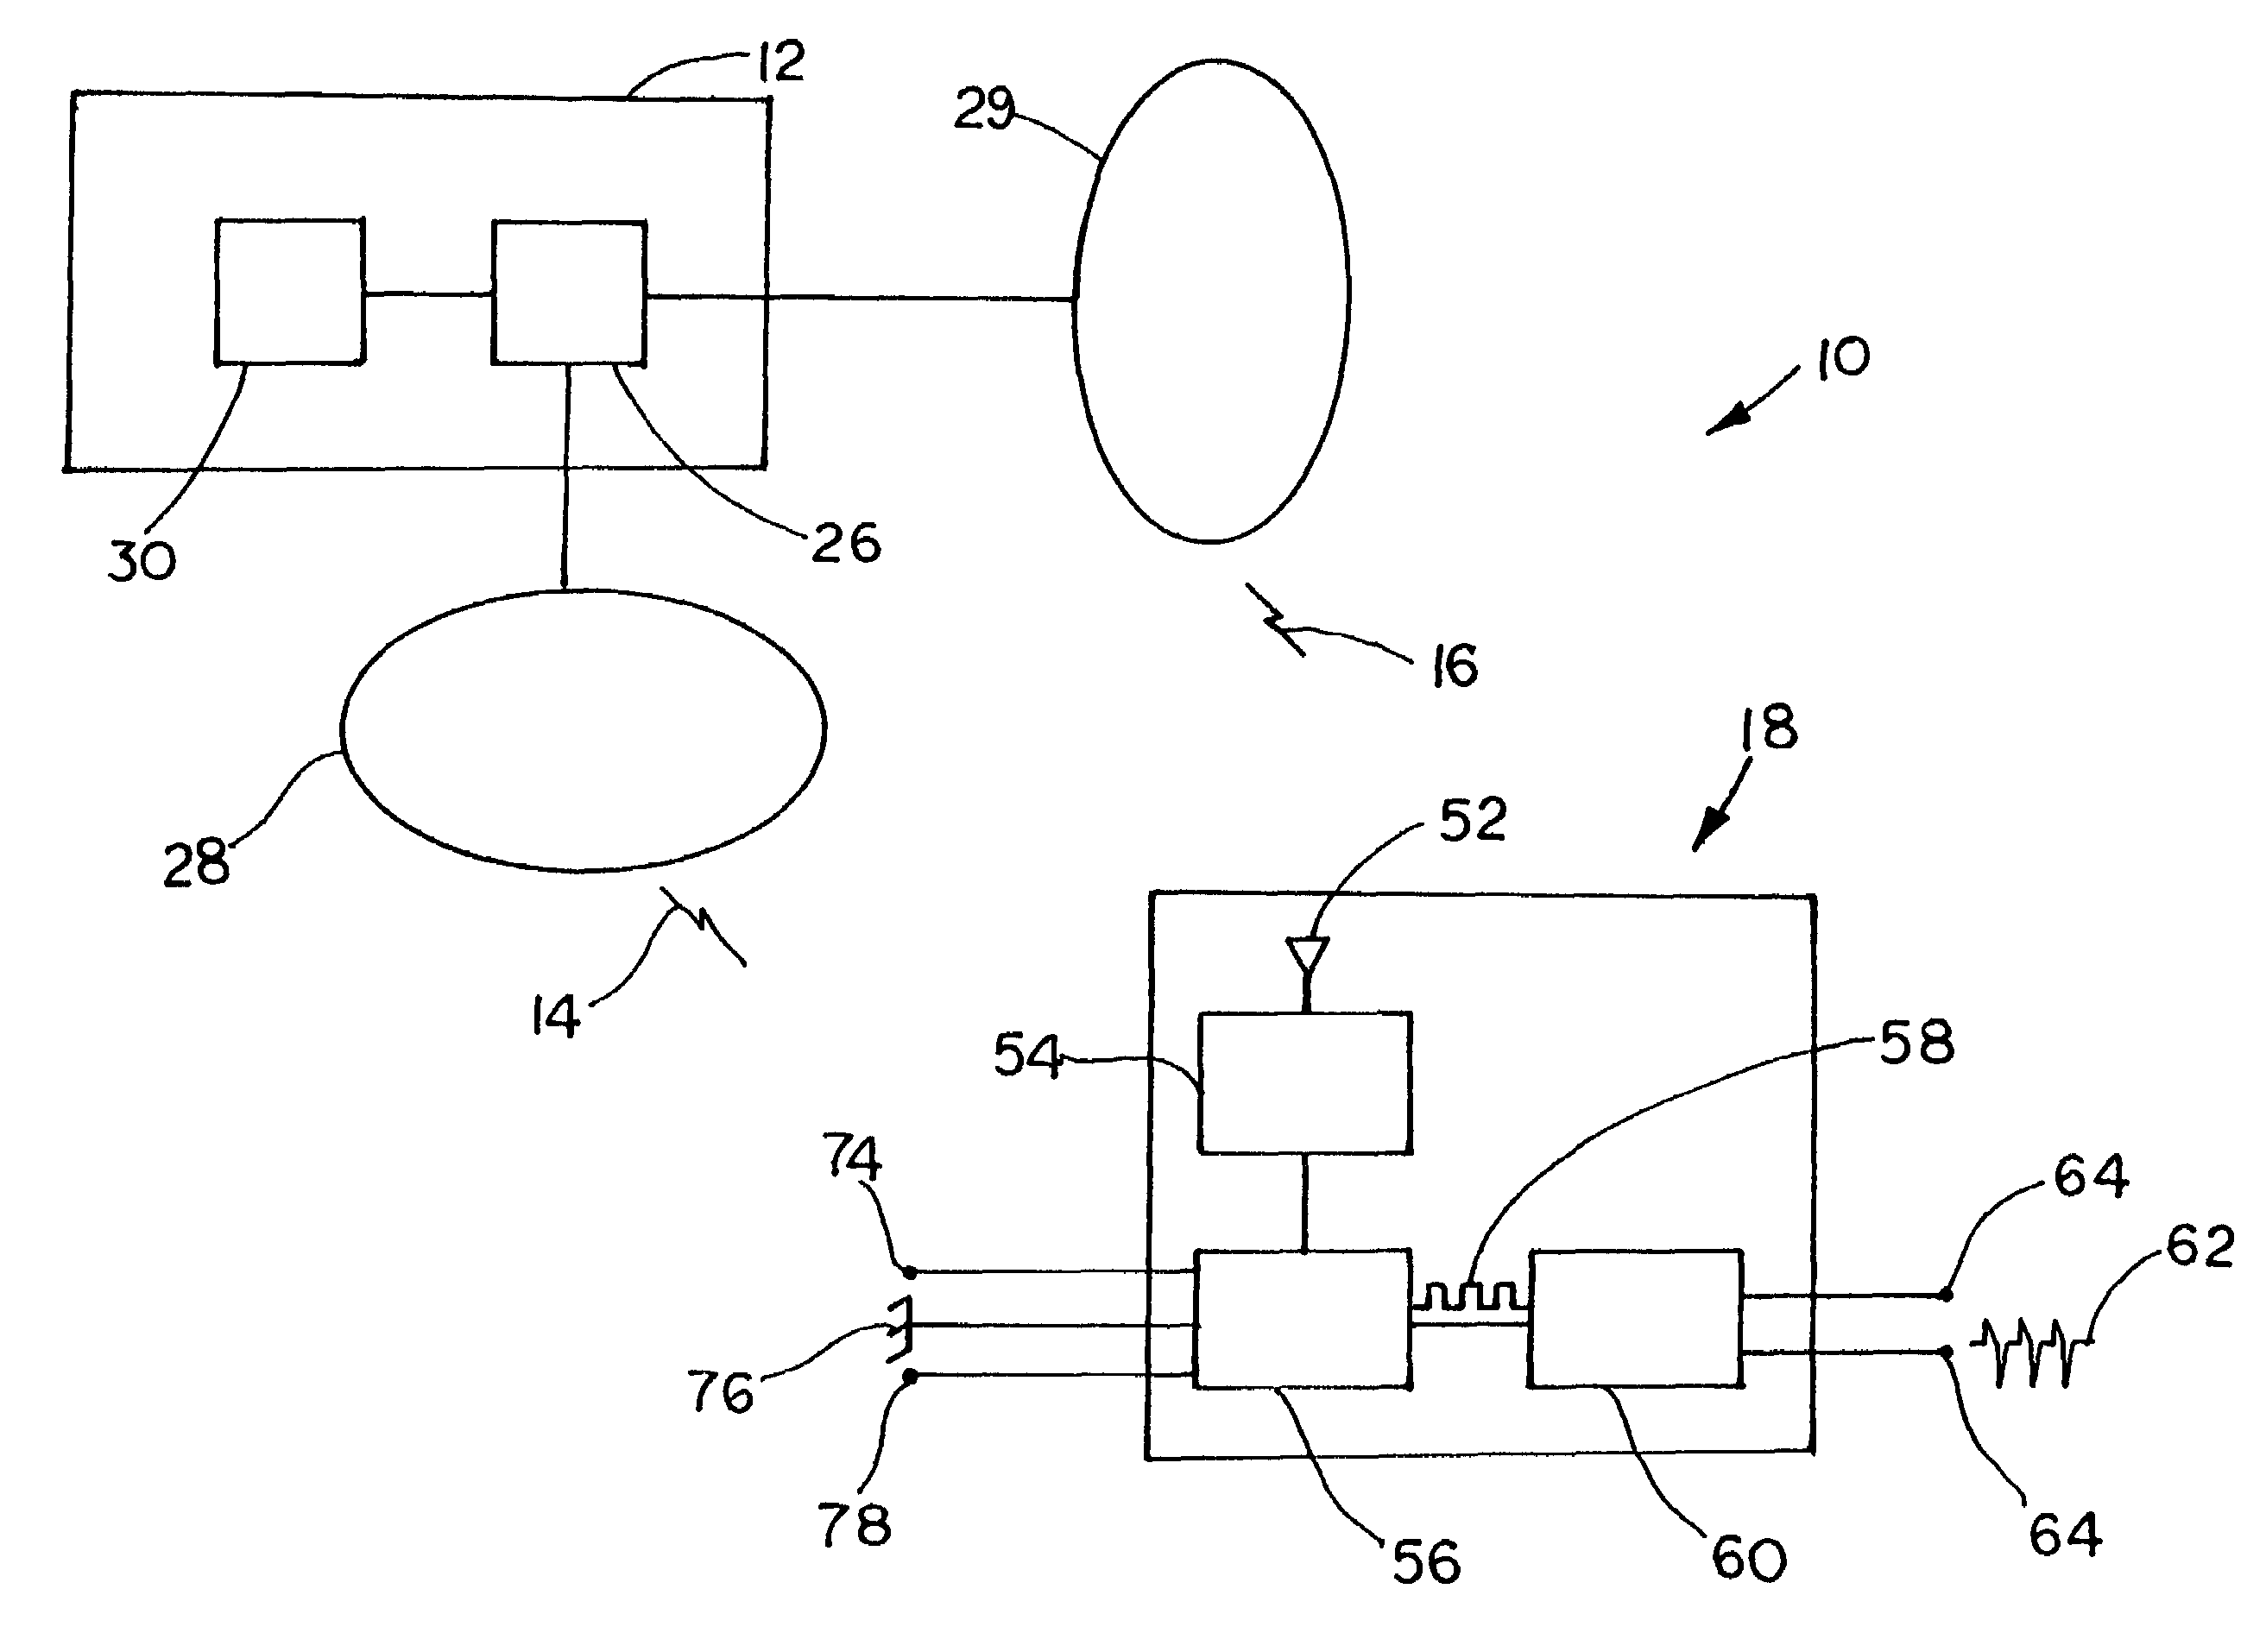 Animal training system with multiple configurable correction settings